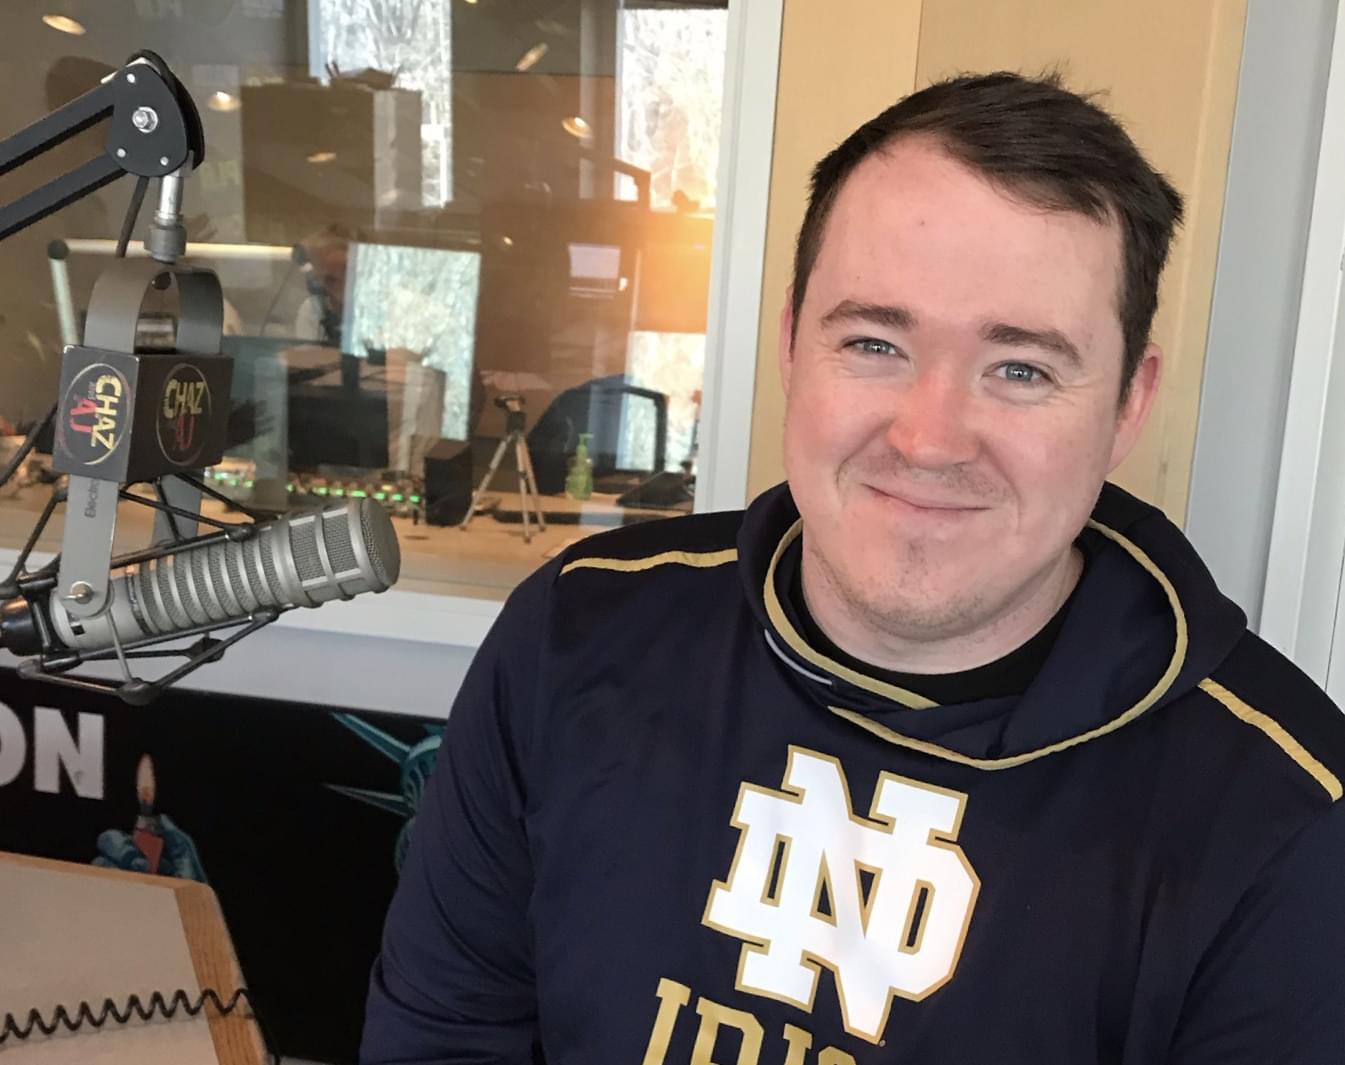 PODCAST – Friday, March 6: Comedian Shane Gillis In Studio, Your Bug Freakout Stories, And What You Need To Know About Coronavirus